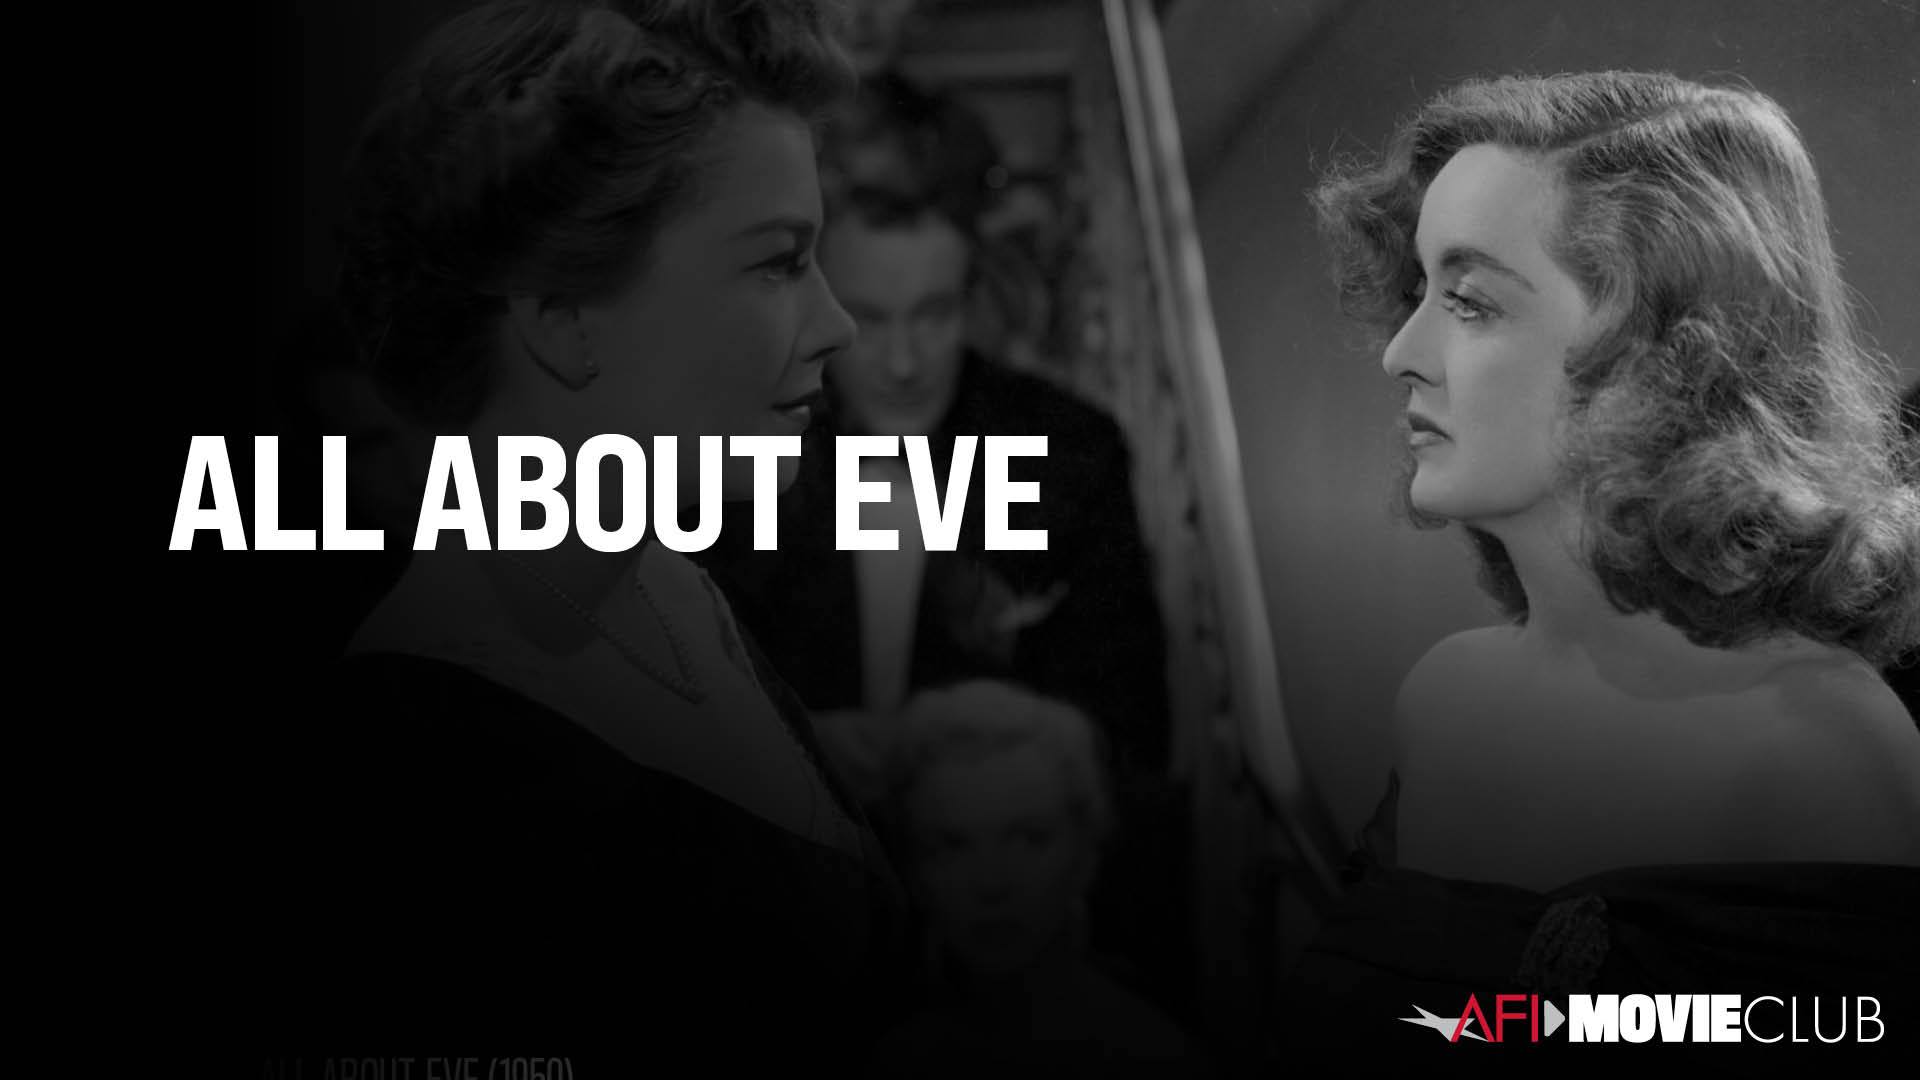 All About Eve Film Still - Bette Davis, Marilyn Monroe, and Anne Baxter